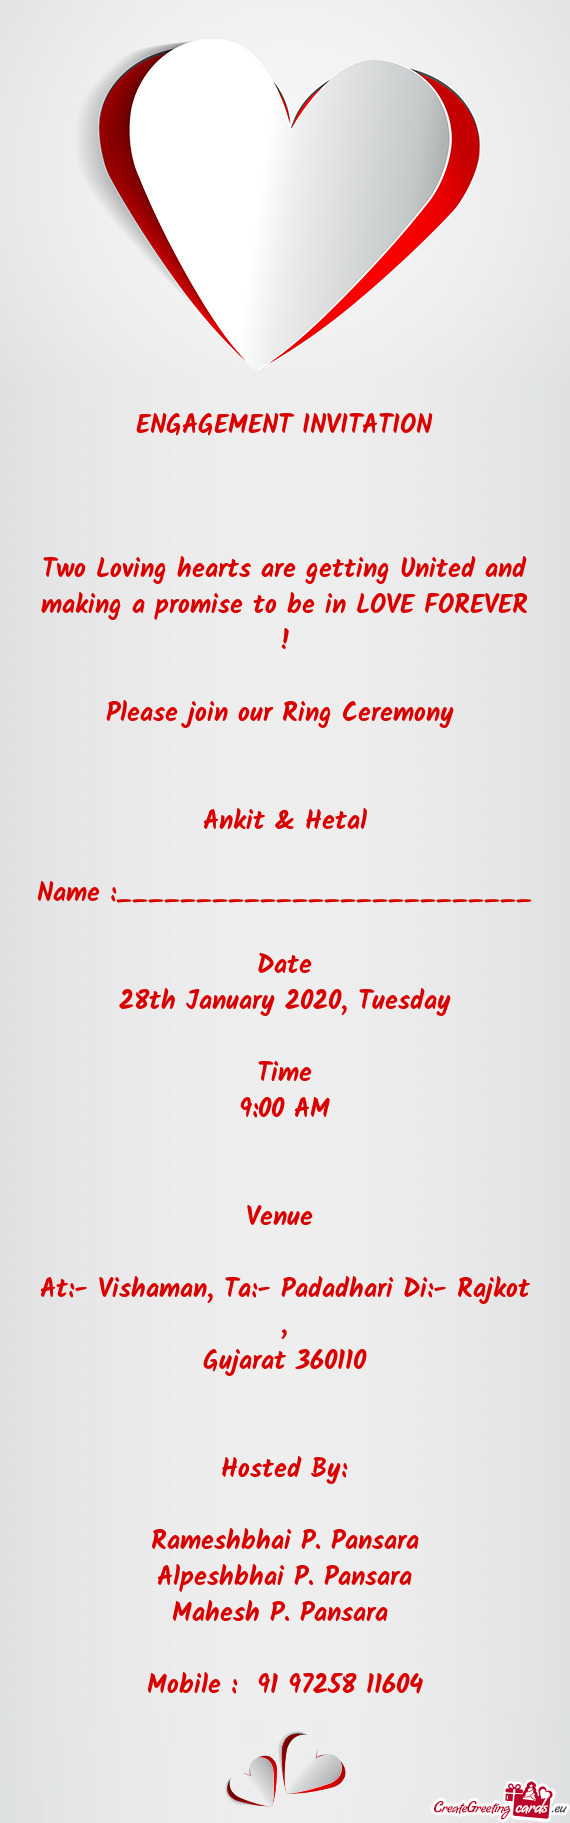 Please join our Ring Ceremony